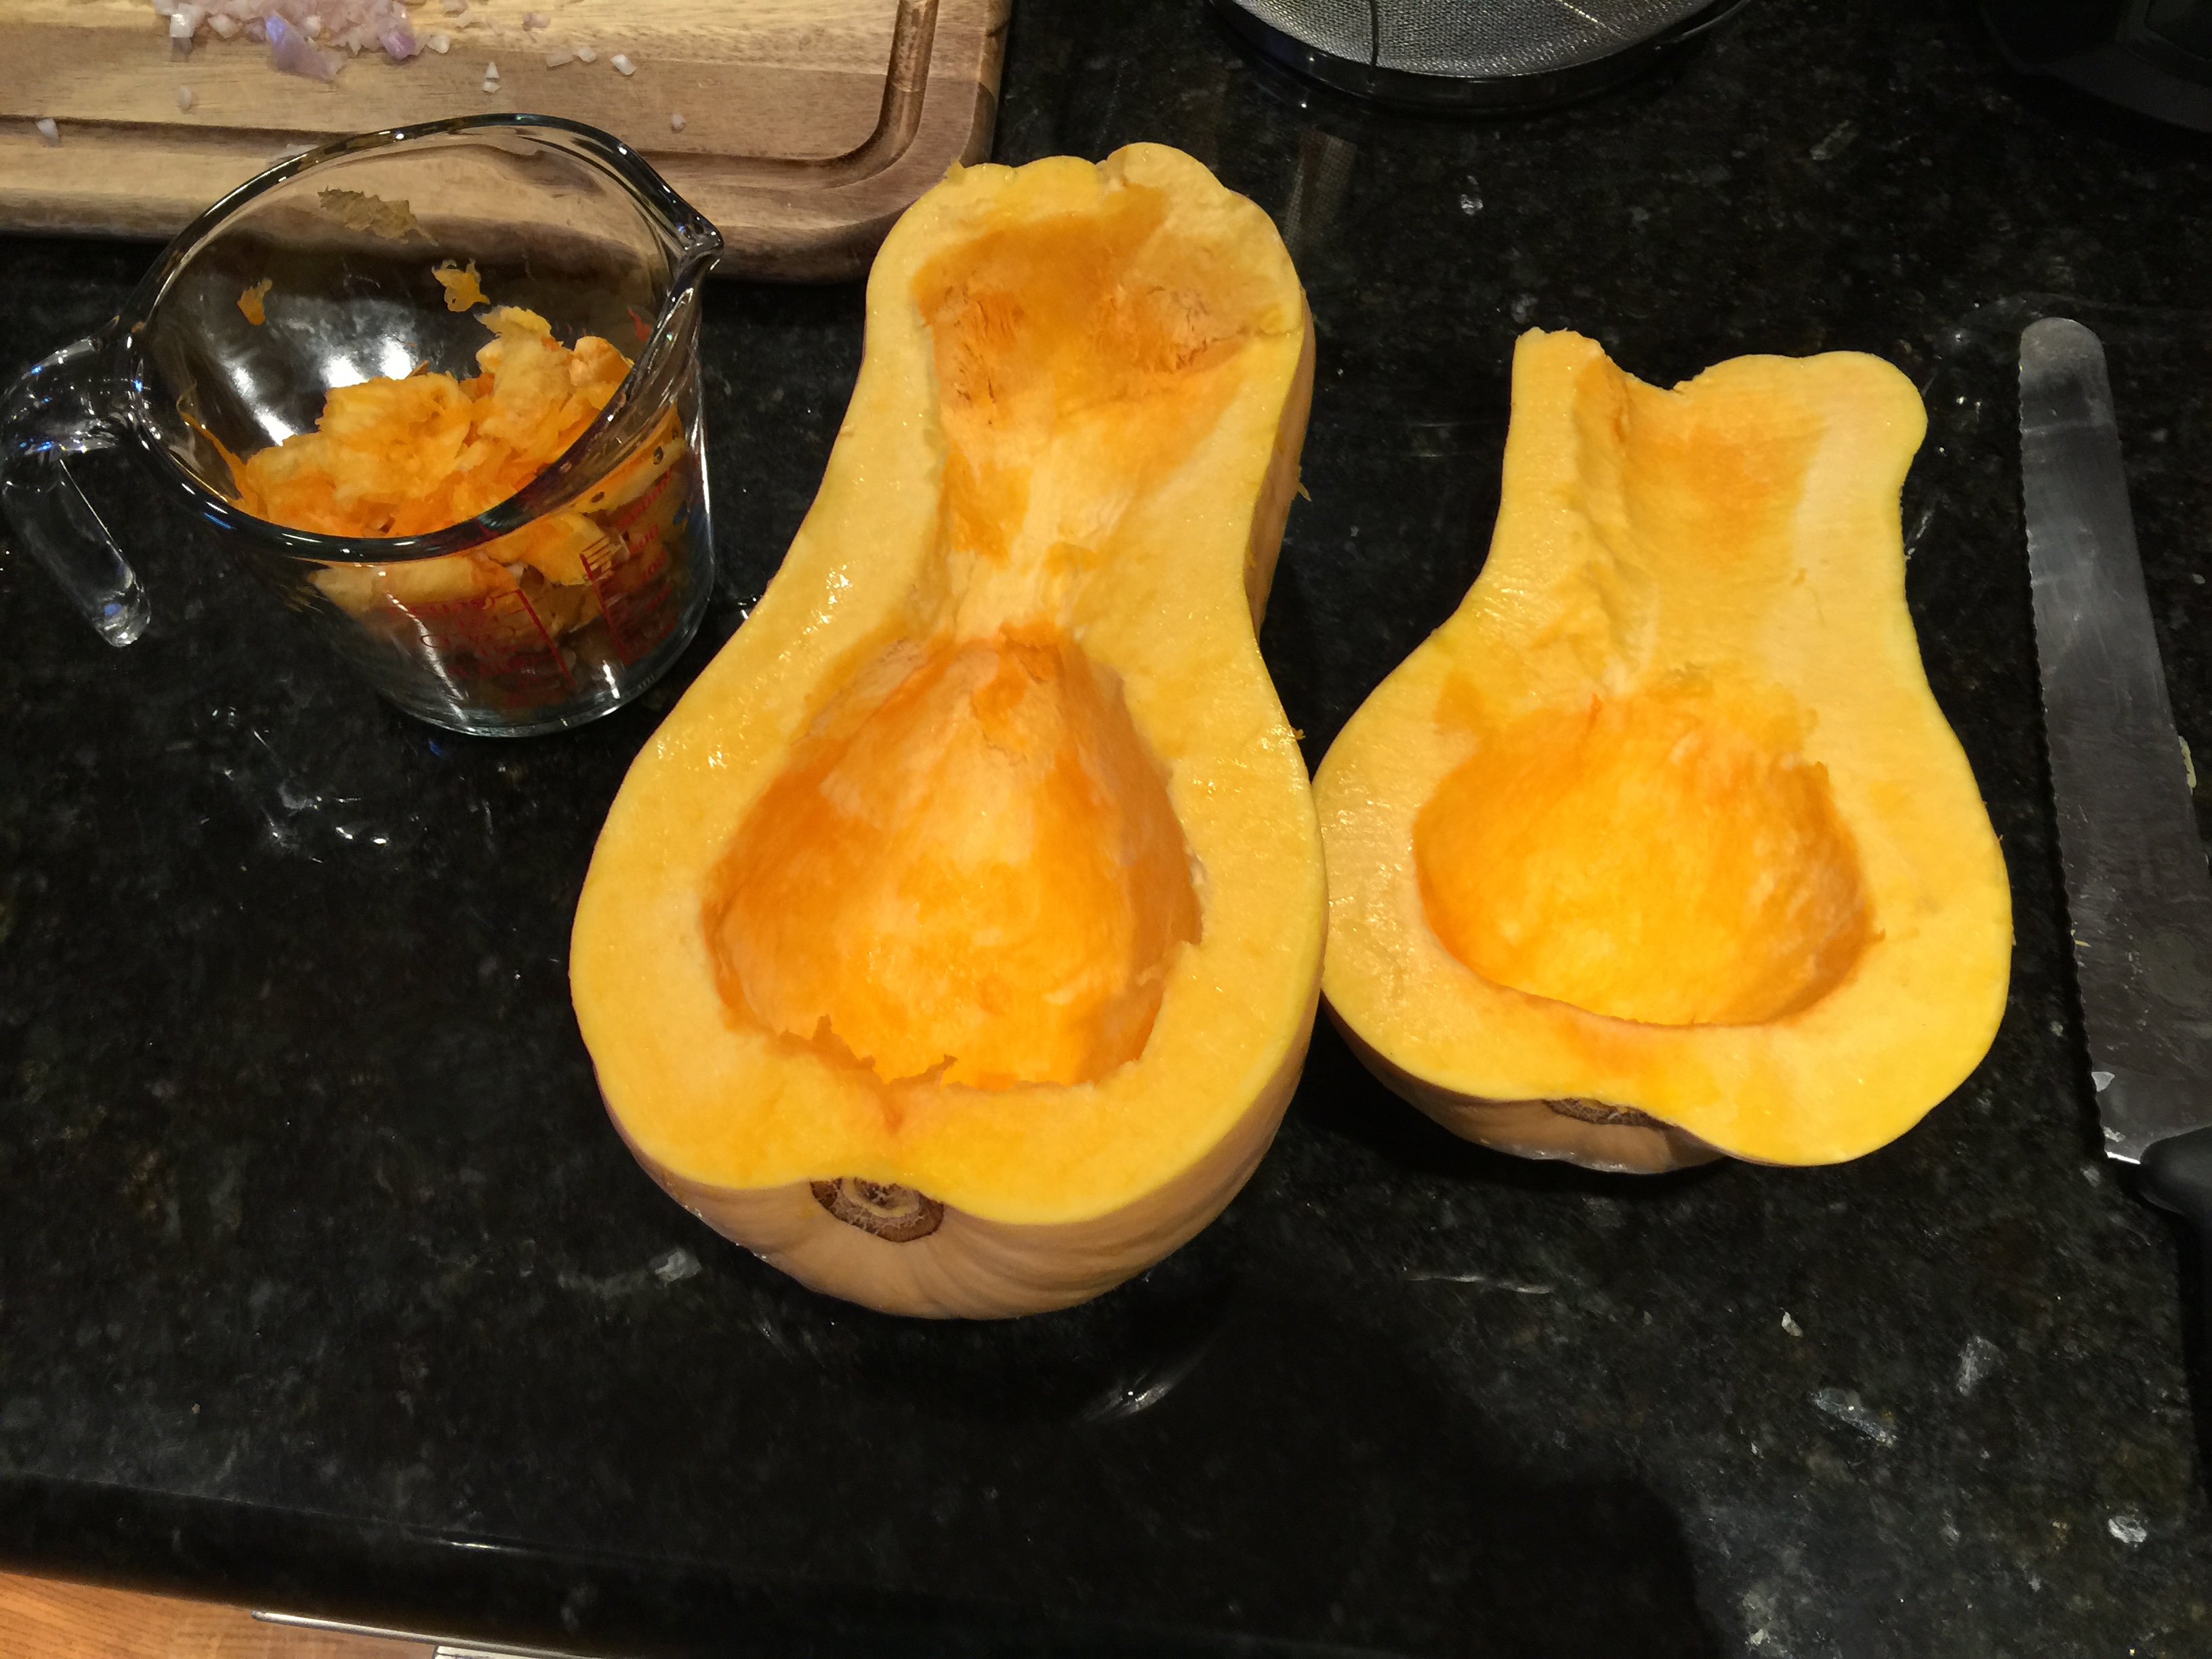 Empty Butternut Squash and Save Seeds and Fibers